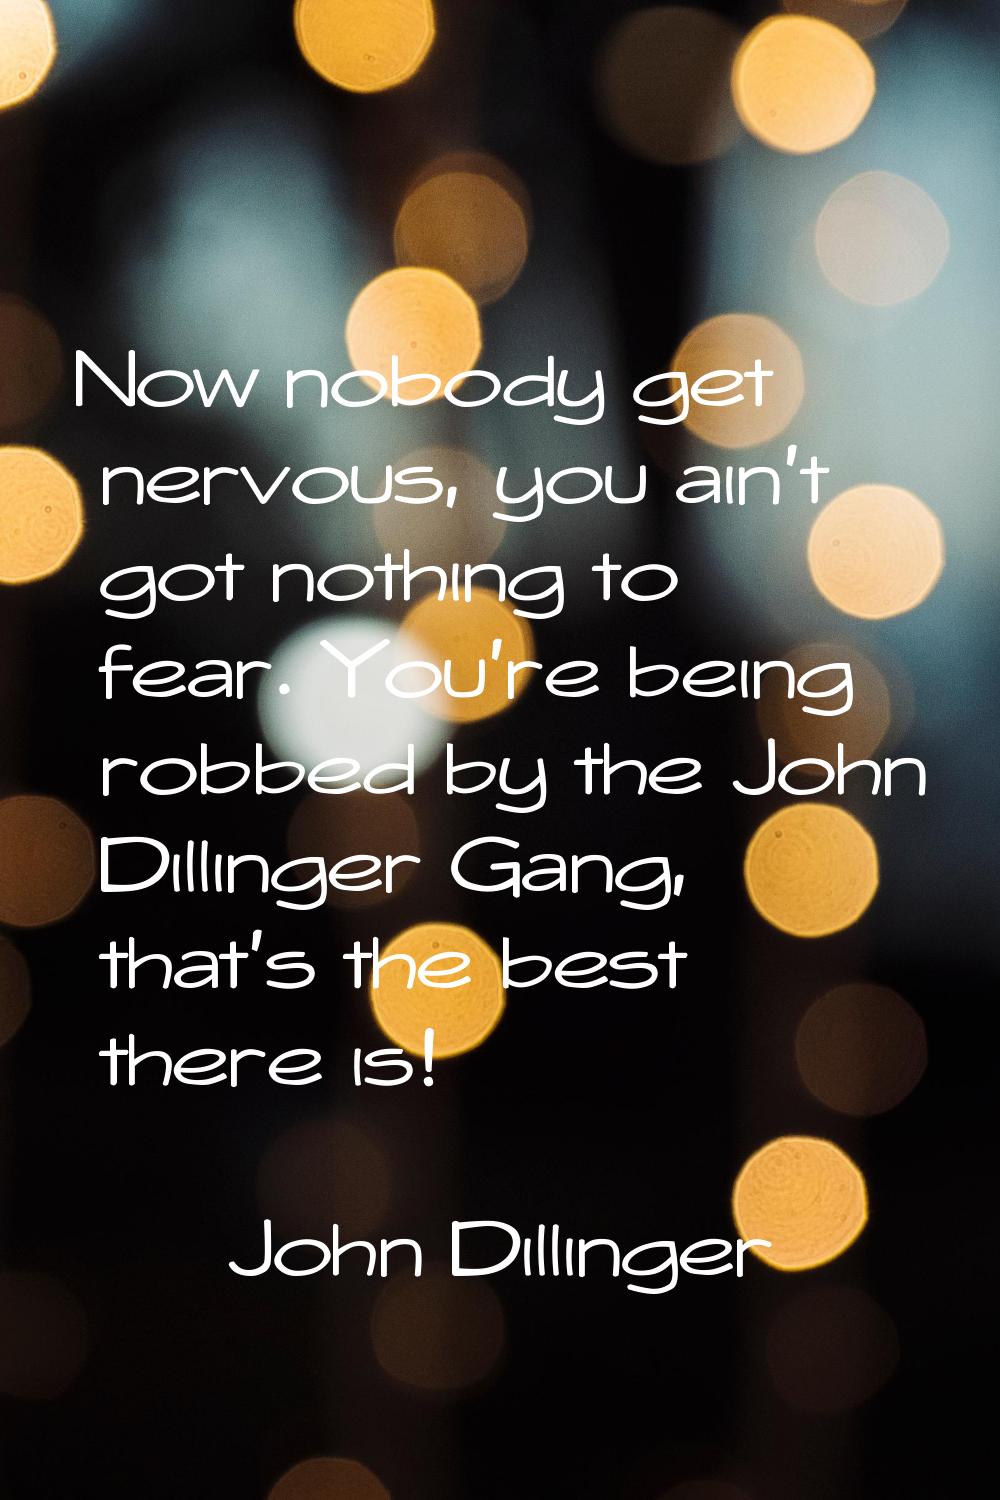 Now nobody get nervous, you ain't got nothing to fear. You're being robbed by the John Dillinger Ga